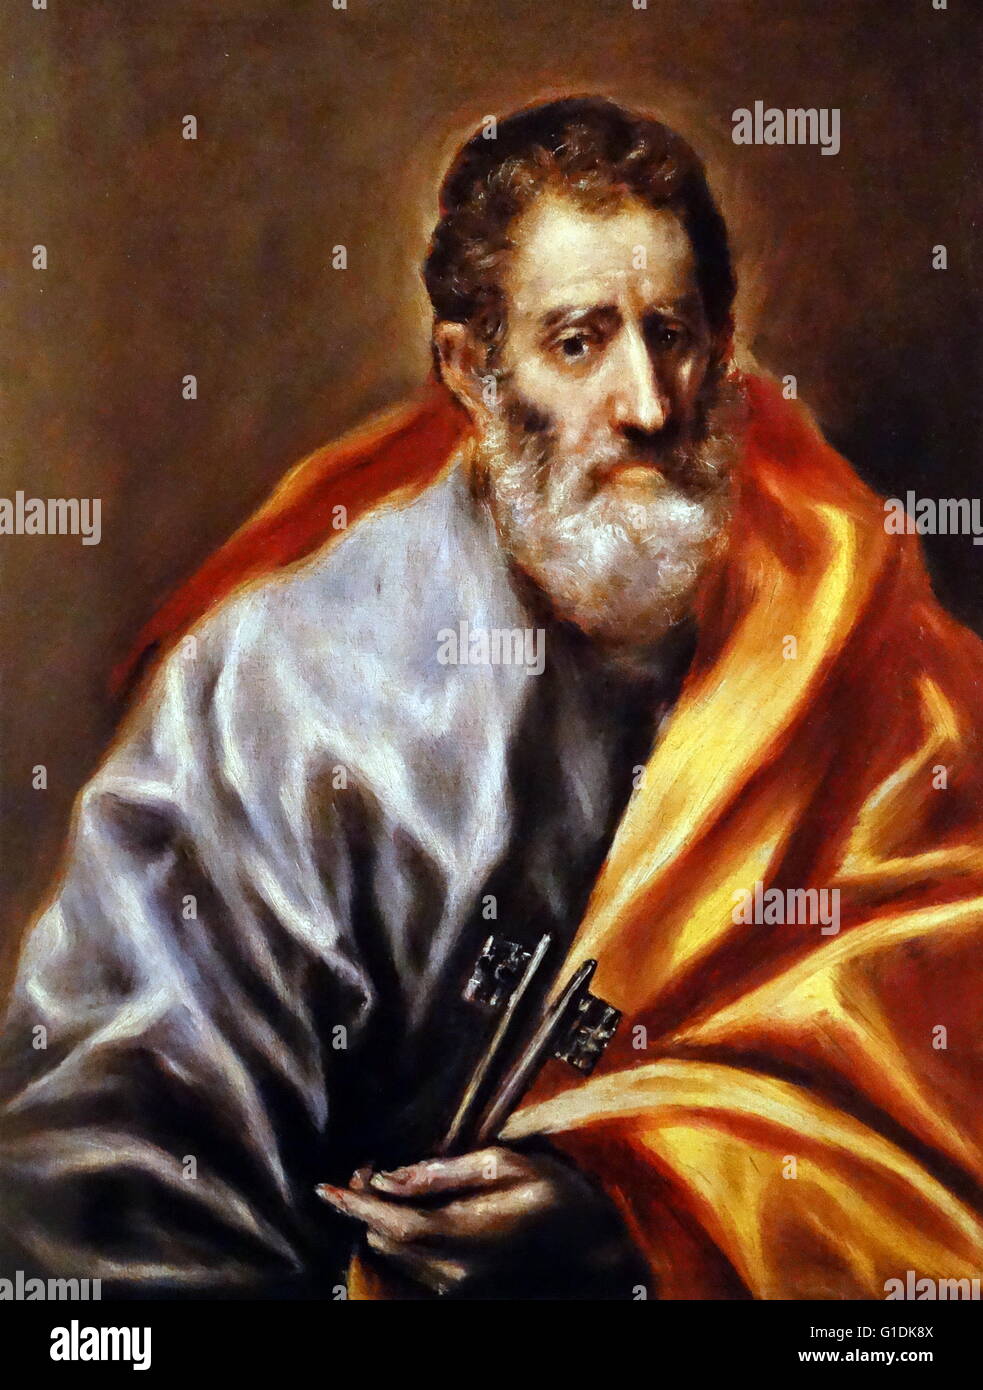 Painting of Saint Peter, one of the Twelve Apostles of Jesus Christ. Dated 17th Century Stock Photo